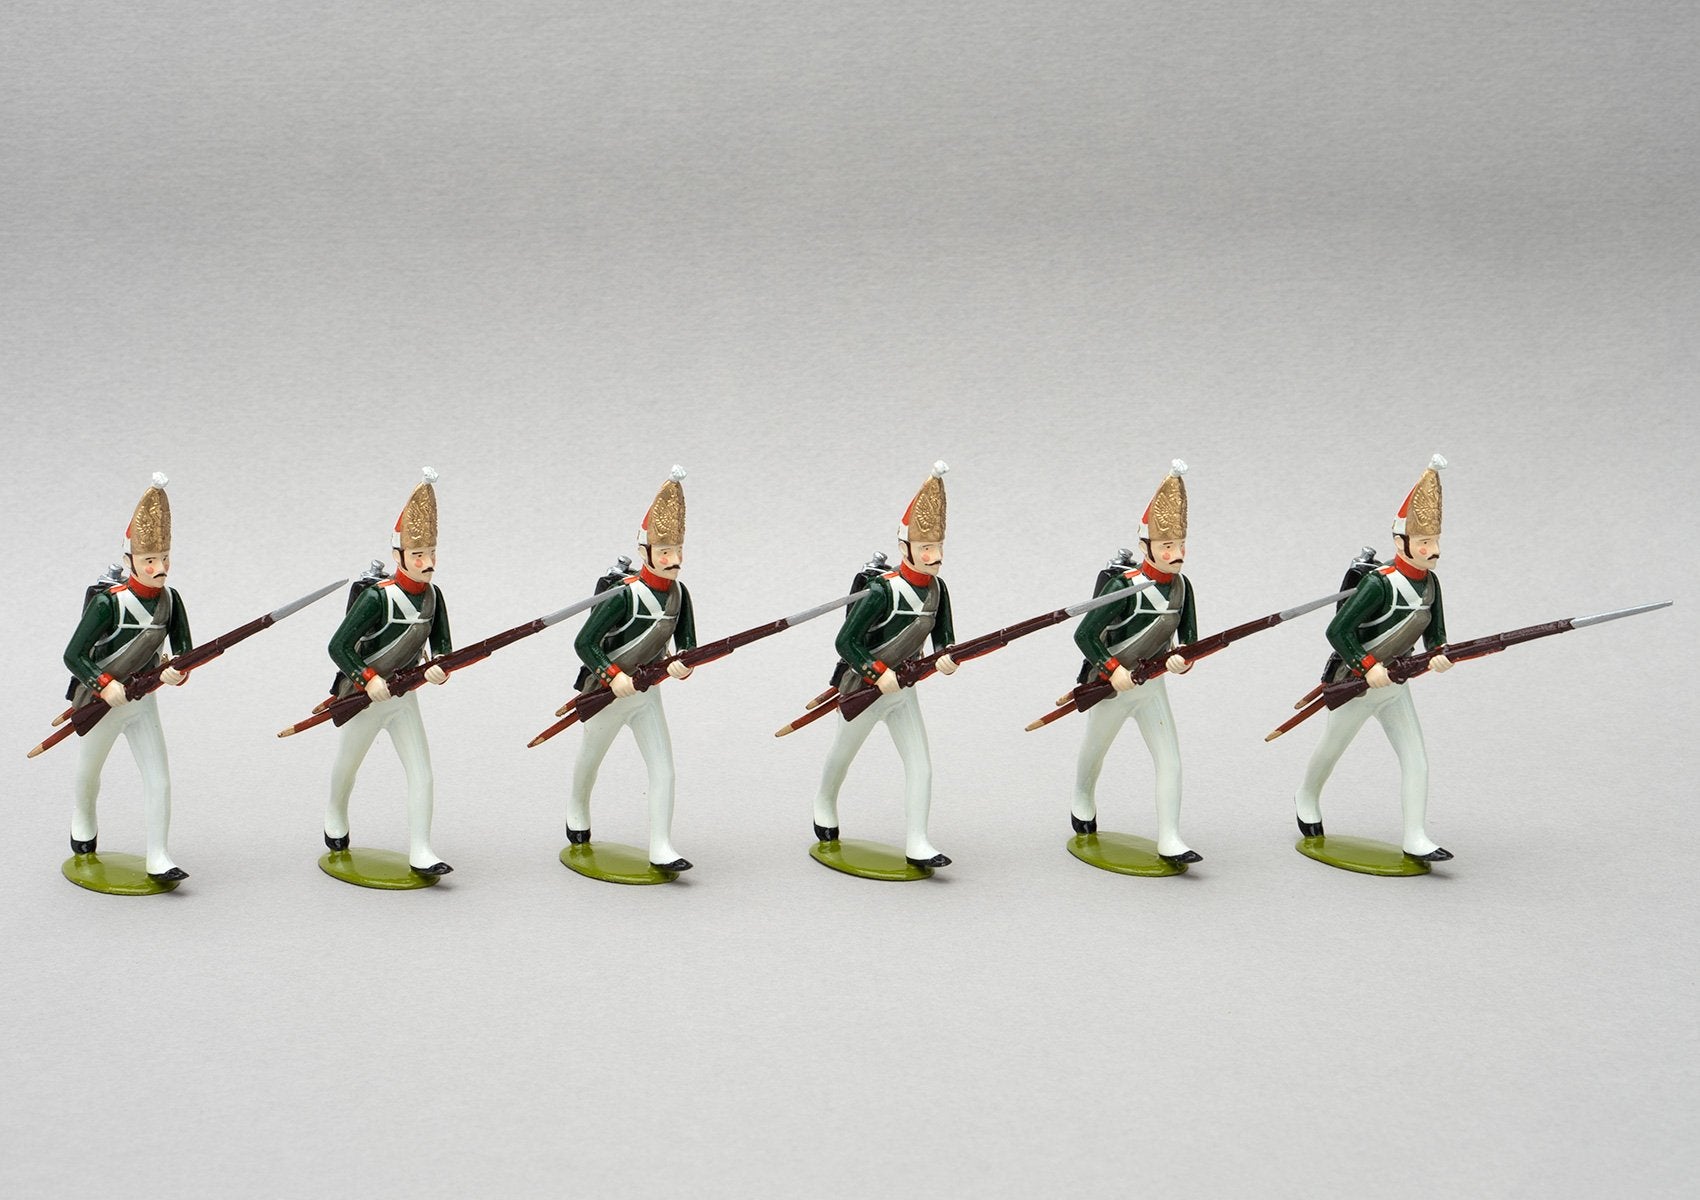 Set 151a Pavlovski Grenadiers, 1806 | Russian Infantry | Napoleonic Wars | Six men with mitre cap advancing | Waterloo | © Imperial Productions | Sculpt by David Cowe